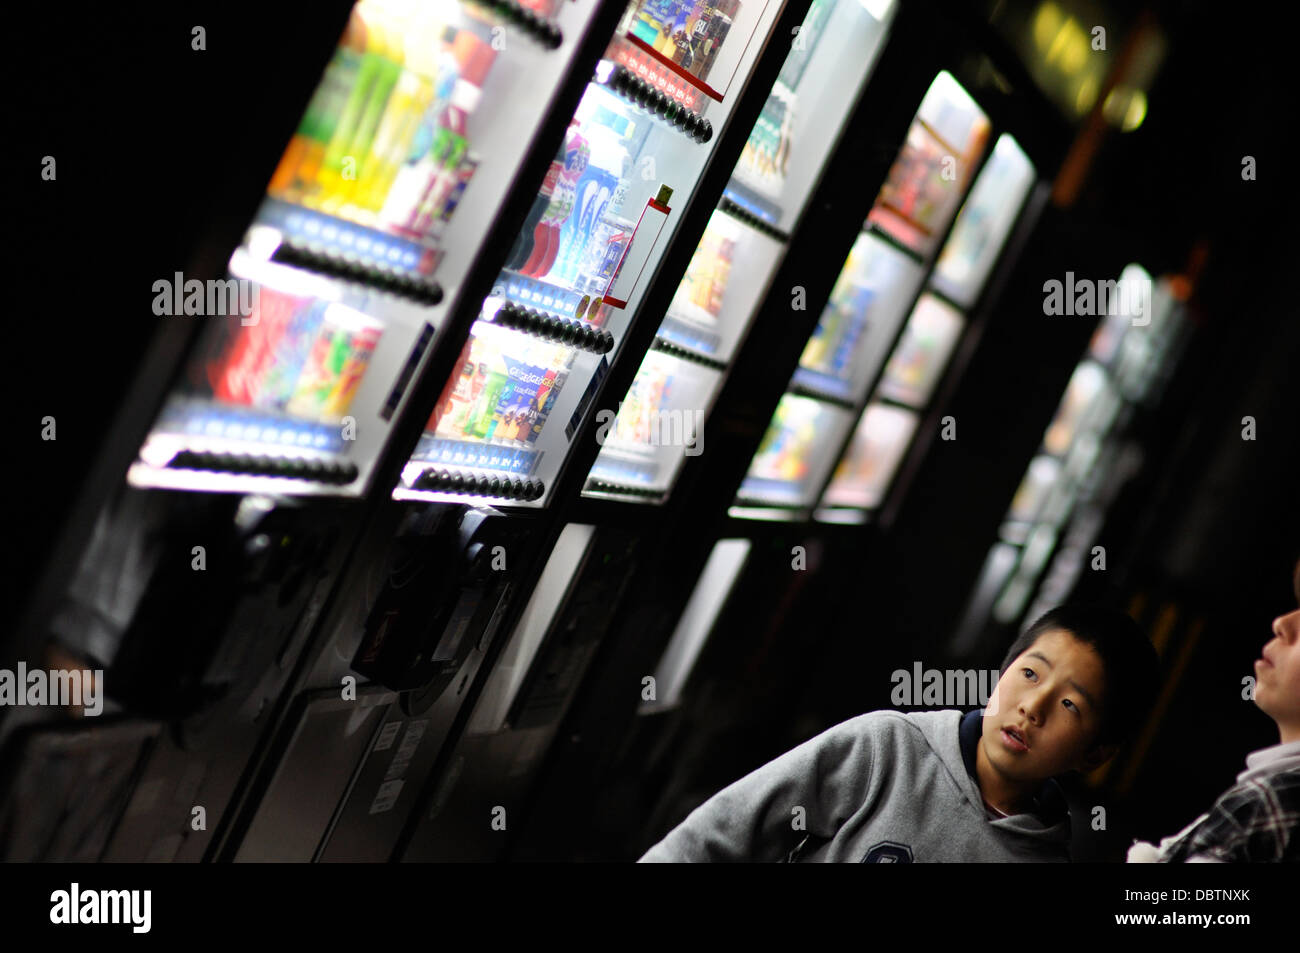 A boy in Japan looking at vending machines selling drinks. Stock Photo